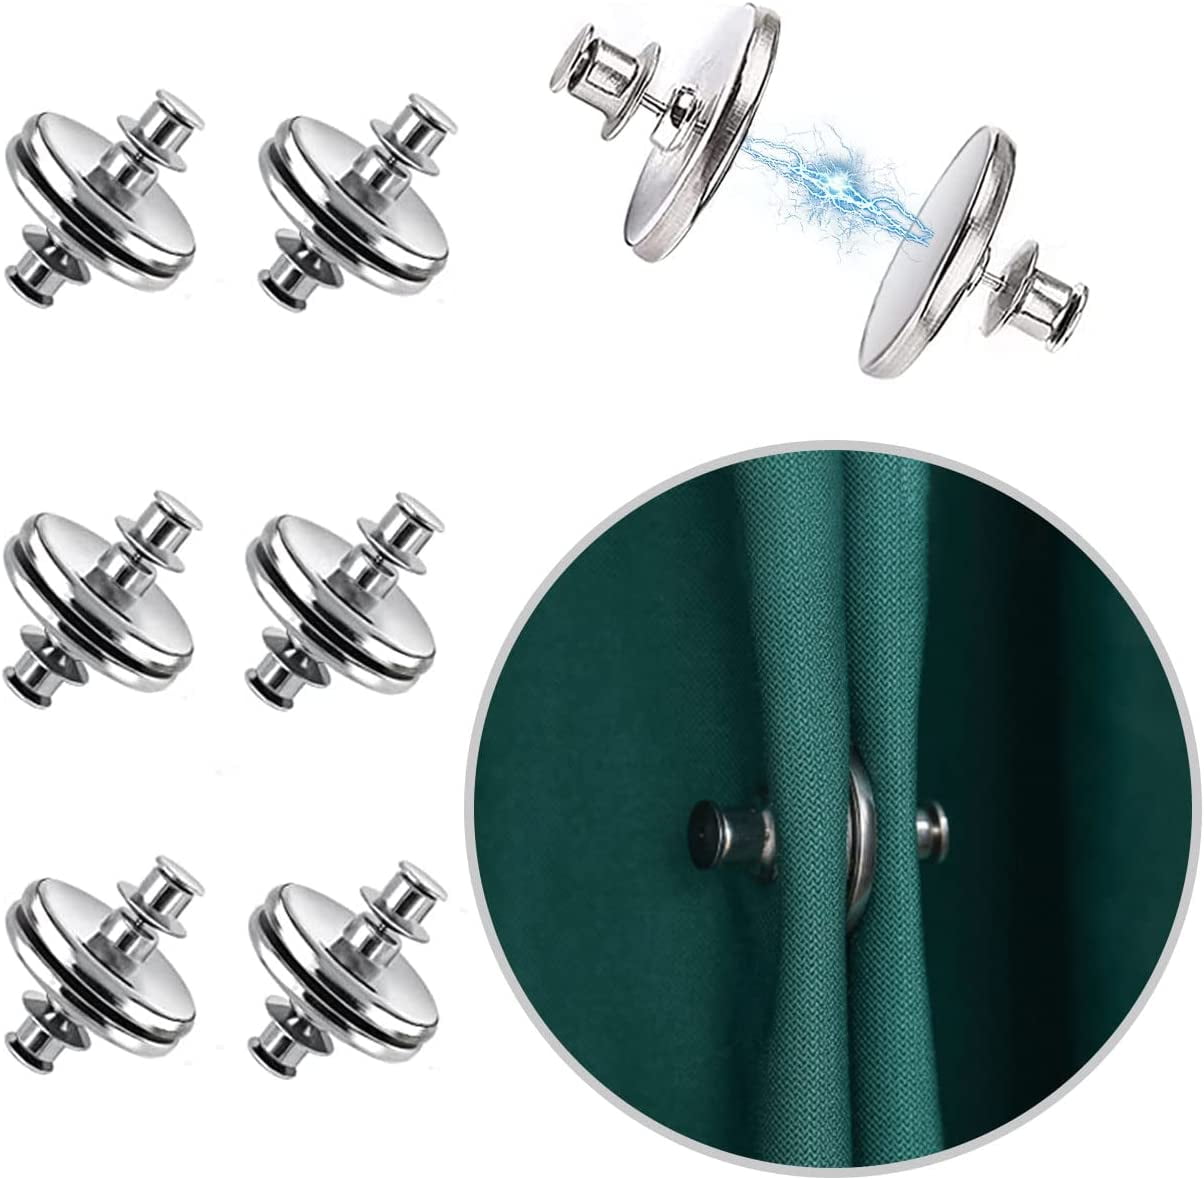 heylad 10 Pairs Curtain Magnets Closure, Magnetic Curtain Clips for Indoor  Outdoor Curtains Prevent Light Leaking, Strong Curtain Weights Magnets for